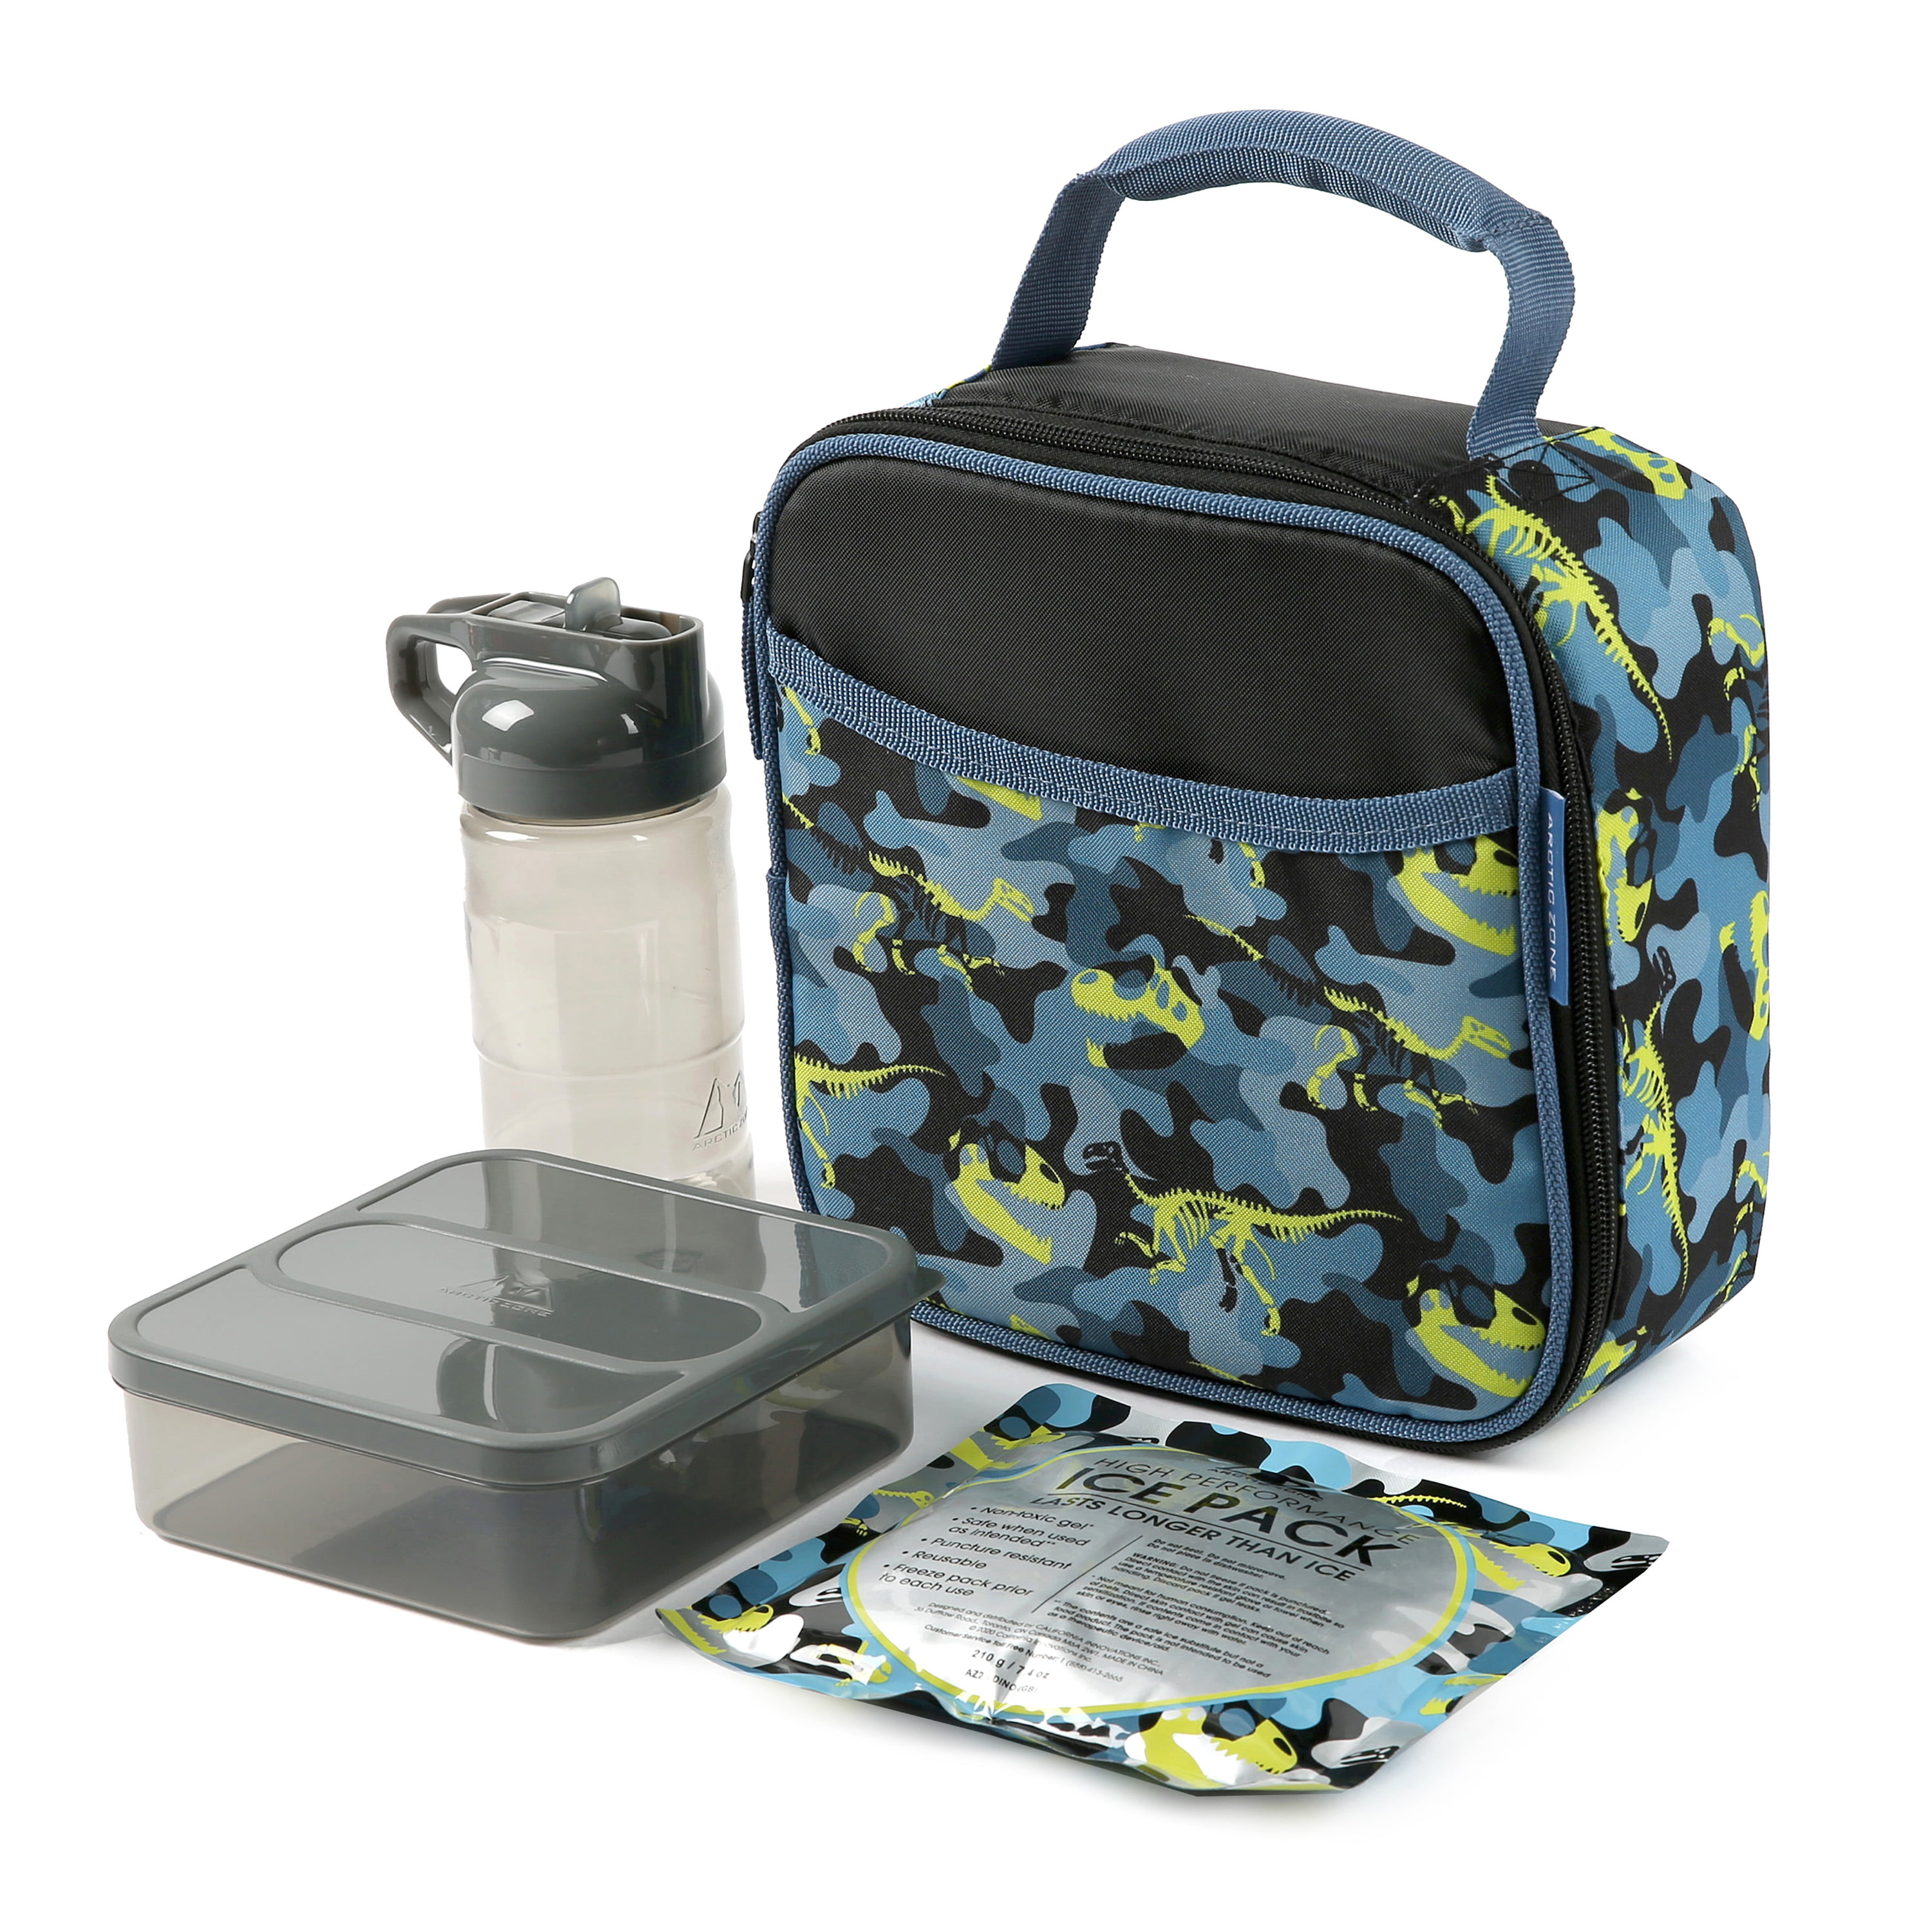 Arctic Zone Upright Reusable Lunch Box Combo with Accessories, Unicorn 